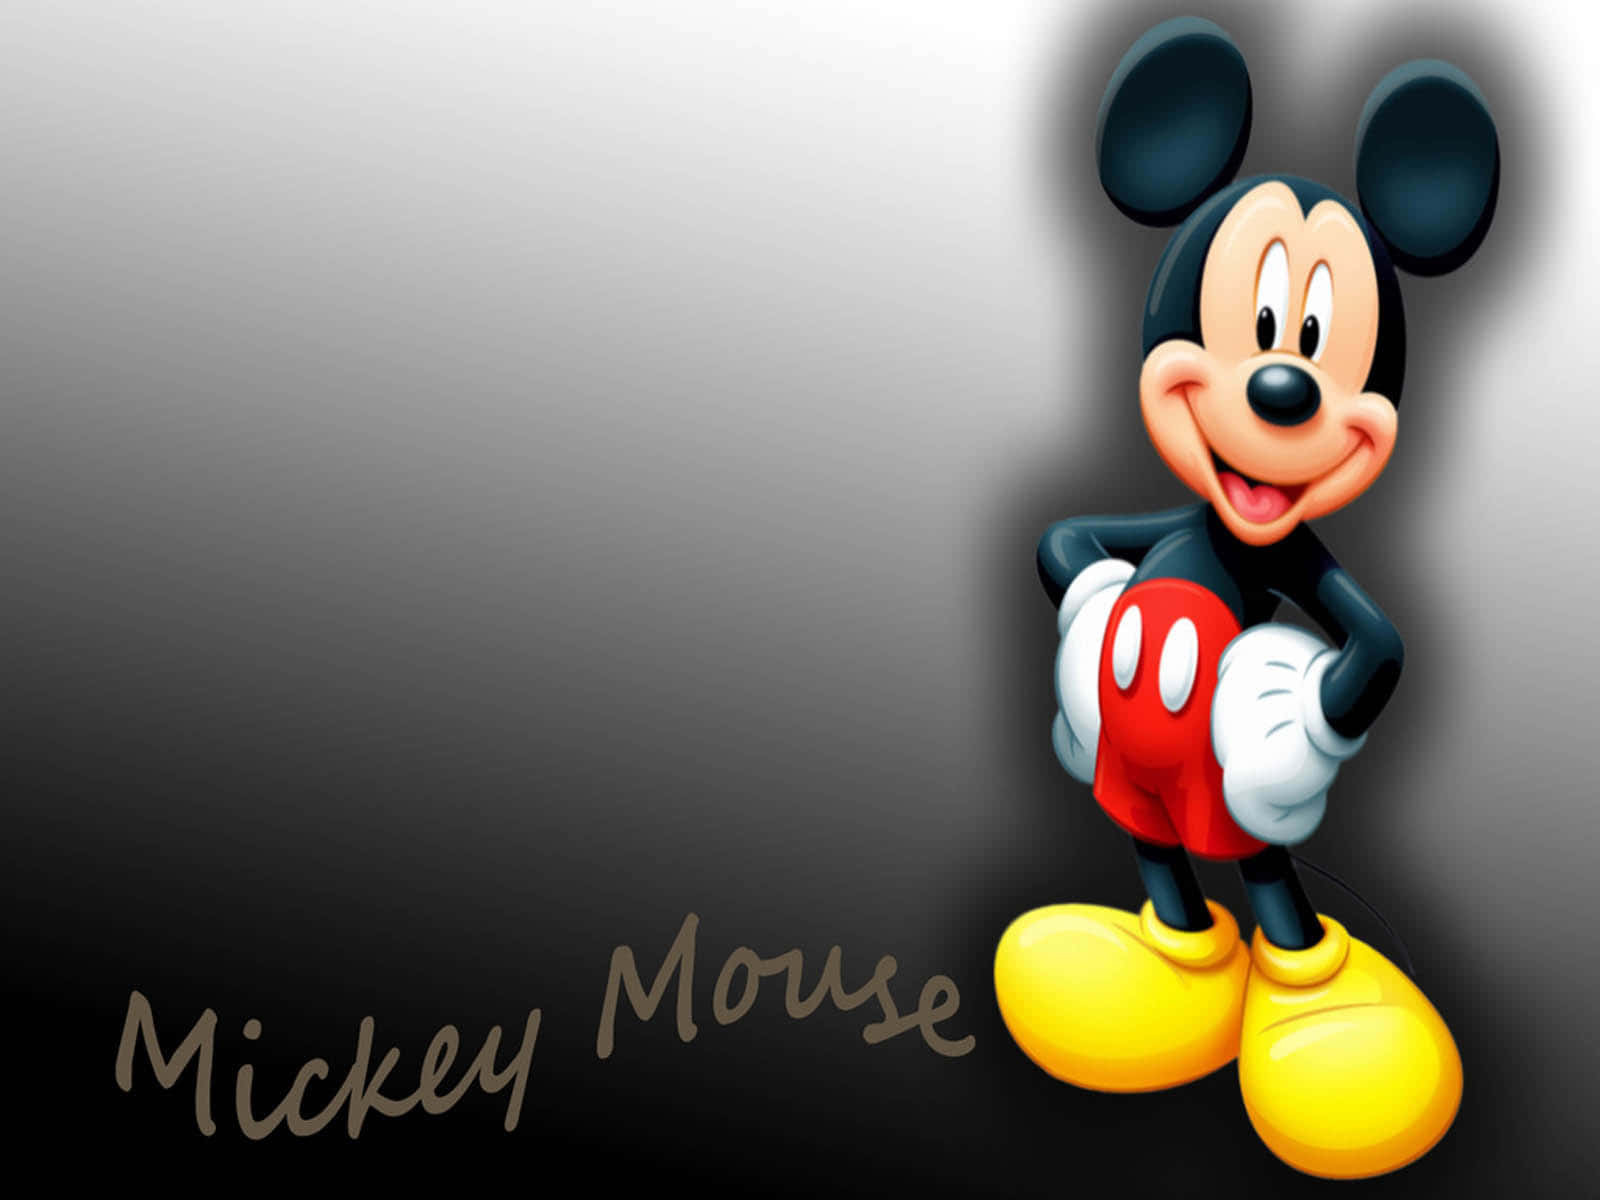 "Making friends since 1928 - Mickey Mouse"